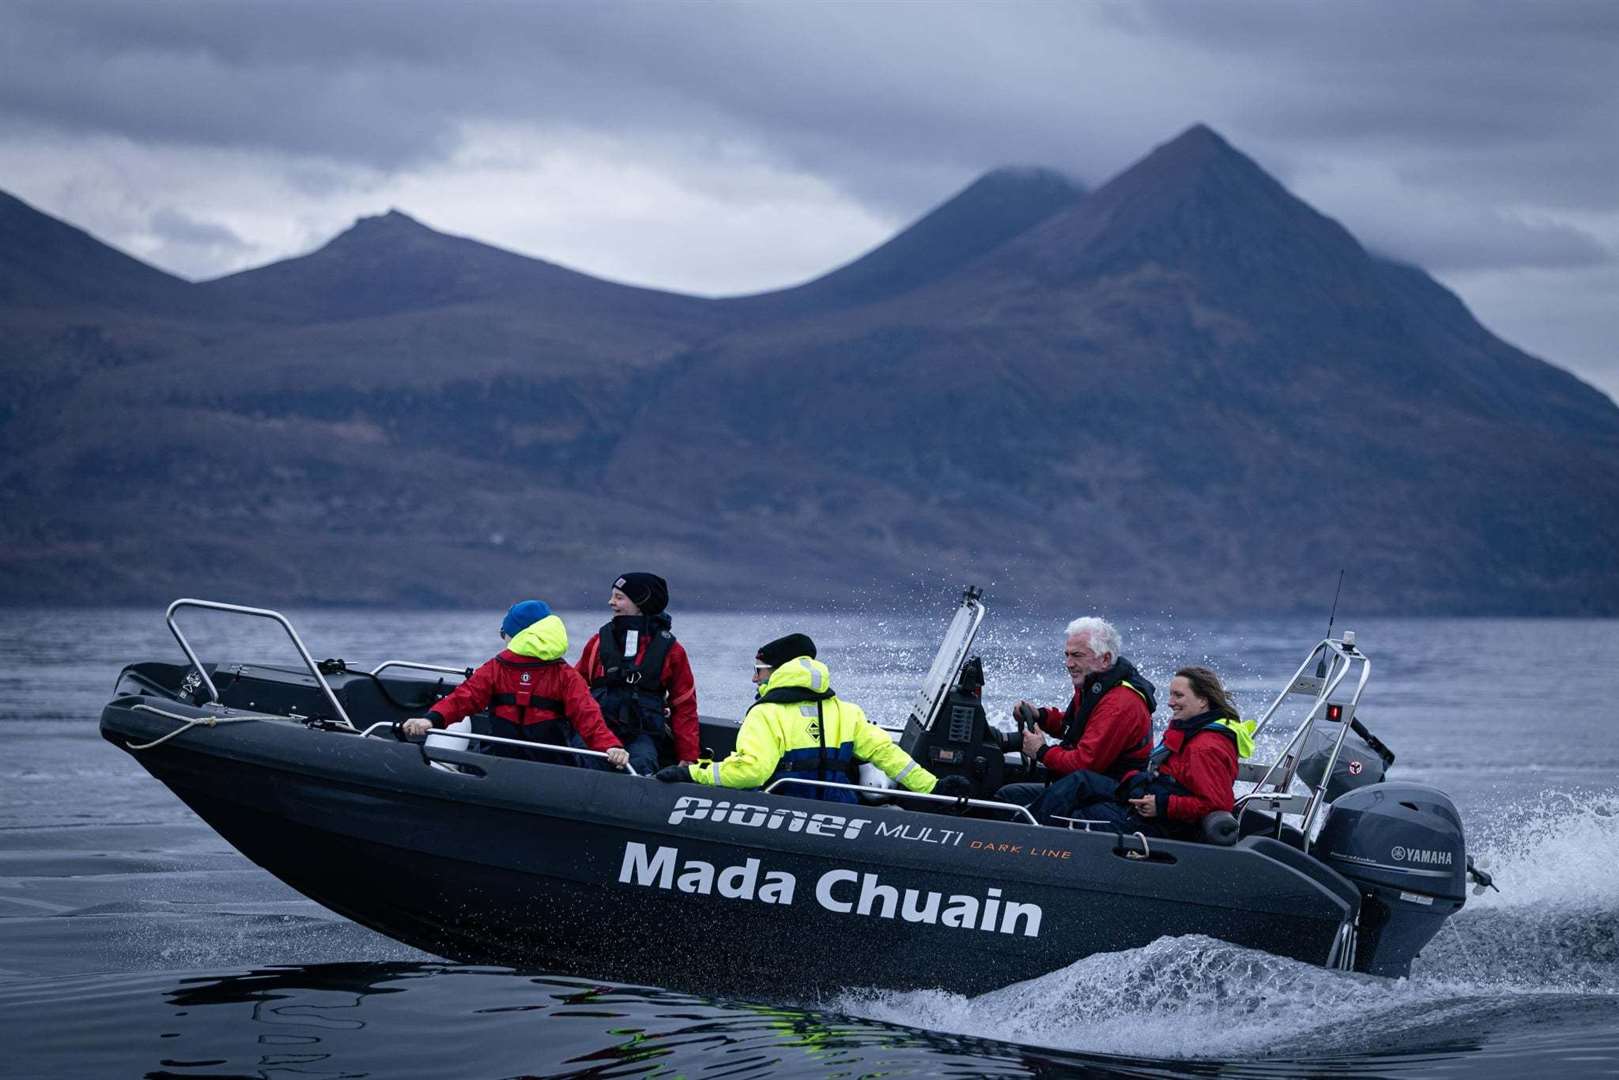 Beach clean uplifts have been carried out thanks to their landing craft, Mada Chuain (Gaelic for Ocean Wolf, the name used for Orca).